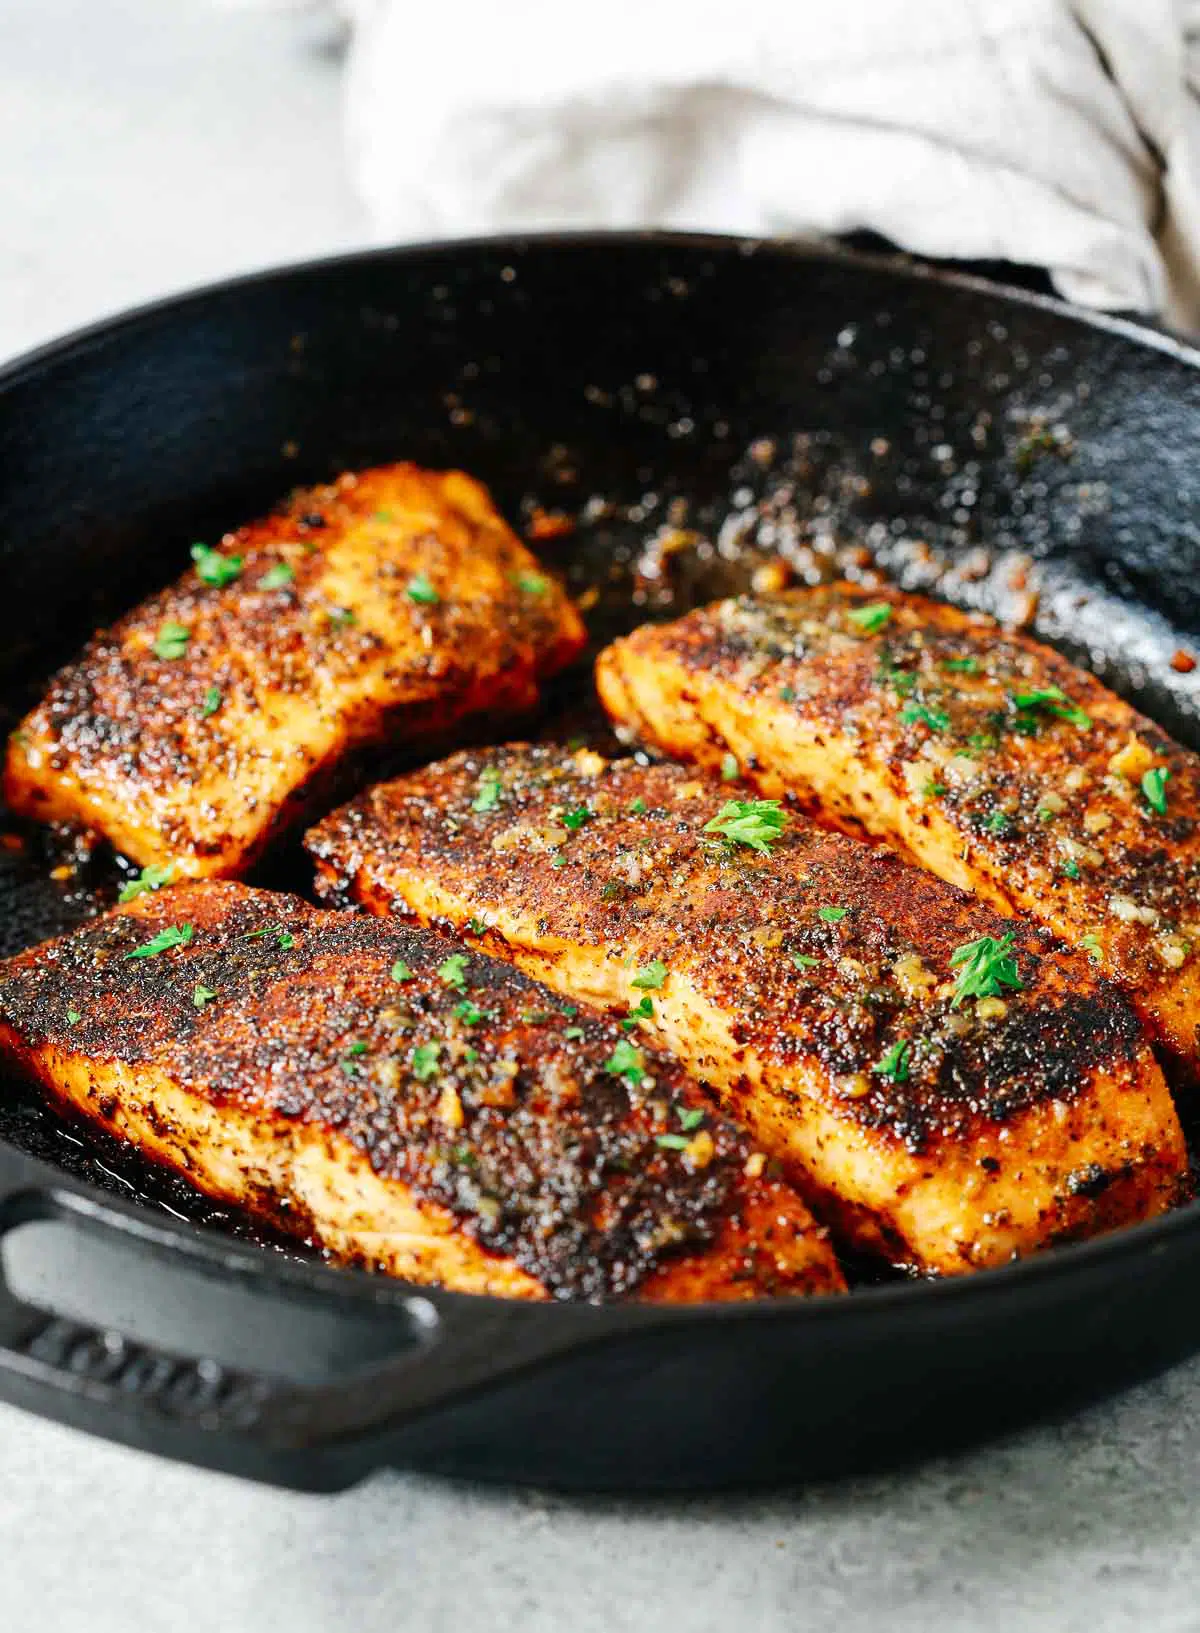 cooking four heavily seasoned fish fillets in a cast iron skillet